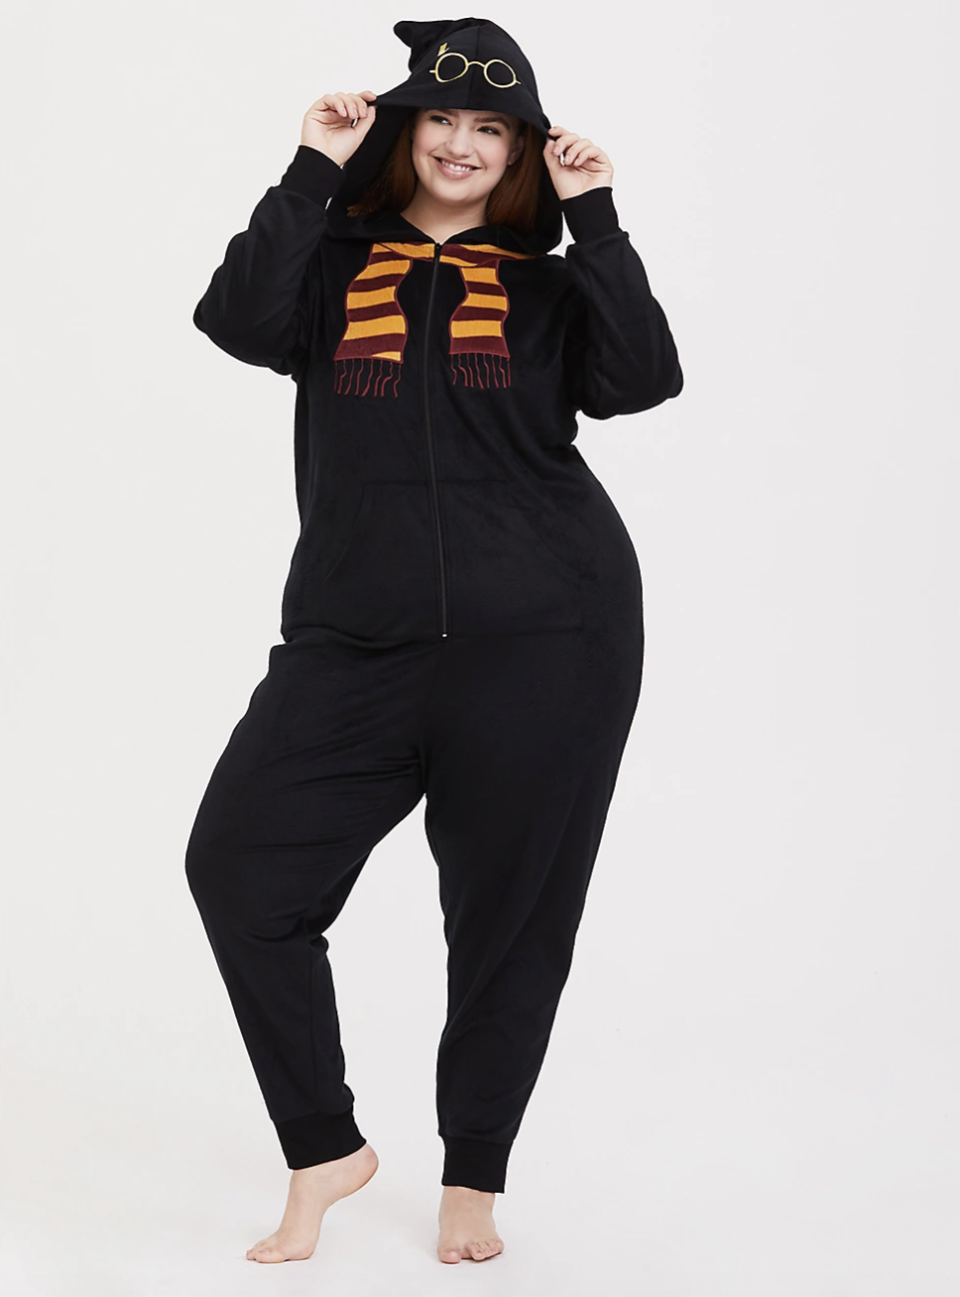 Stay cozy while repping your Gryffindor pride. (Credit: Torrid)